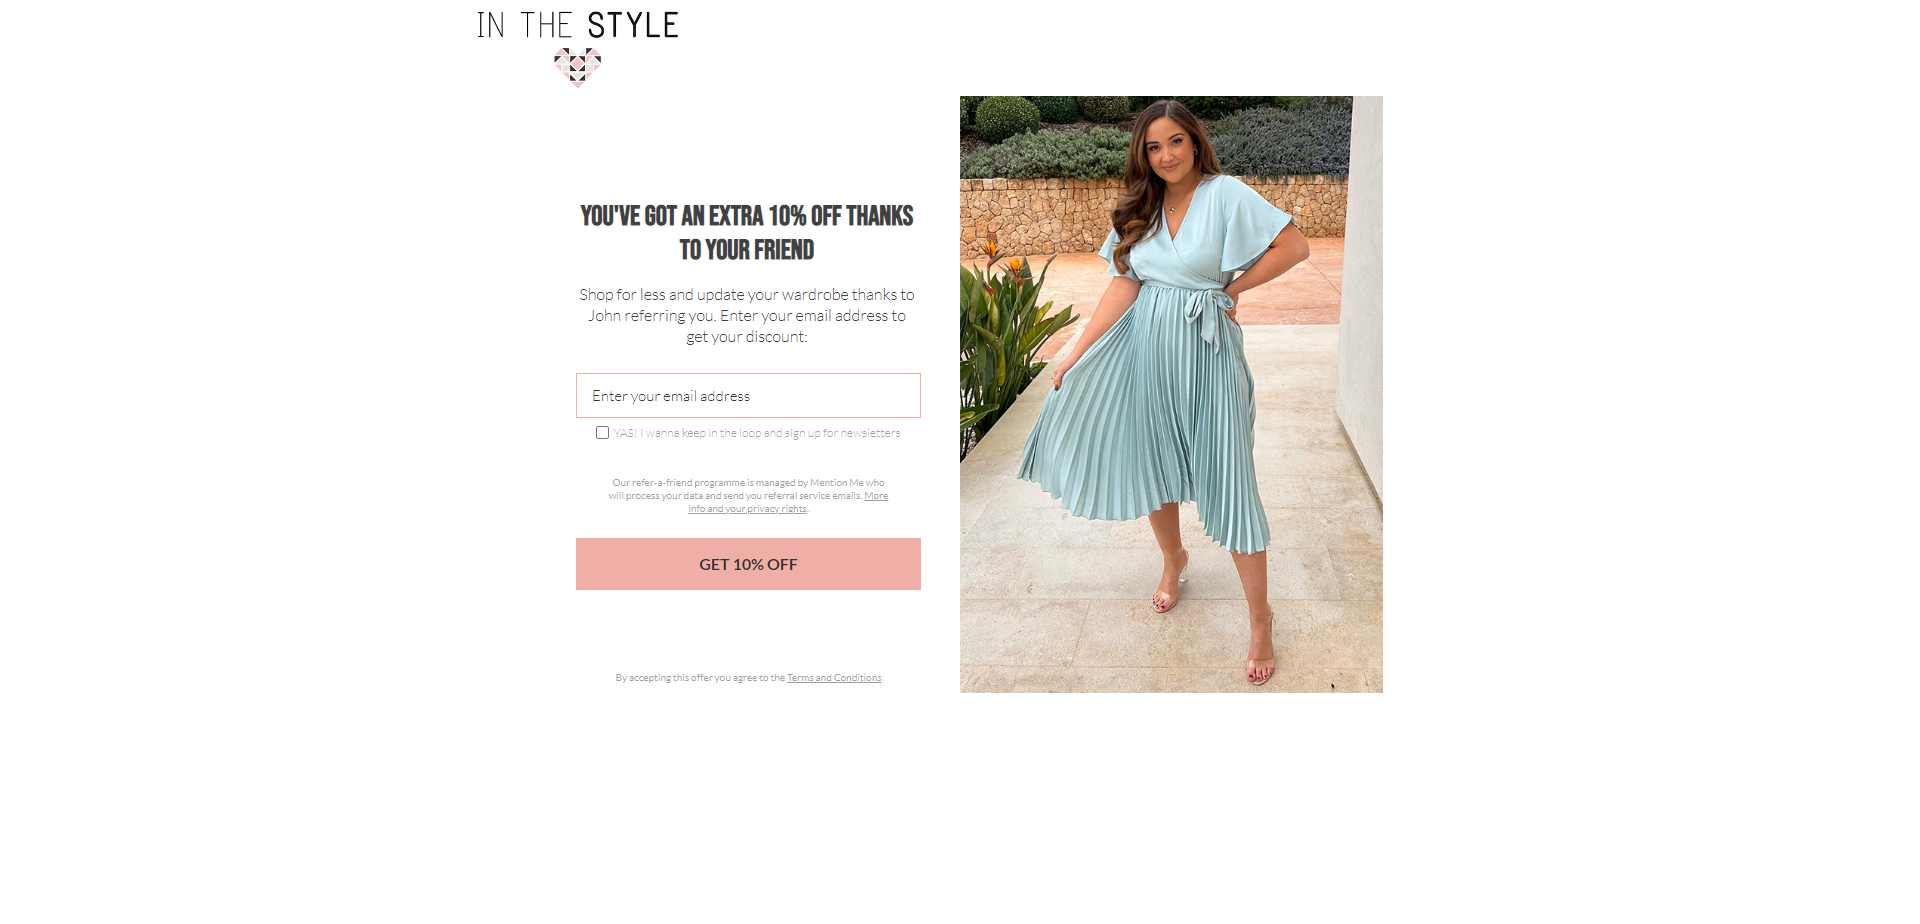 Landing Page for In The Style